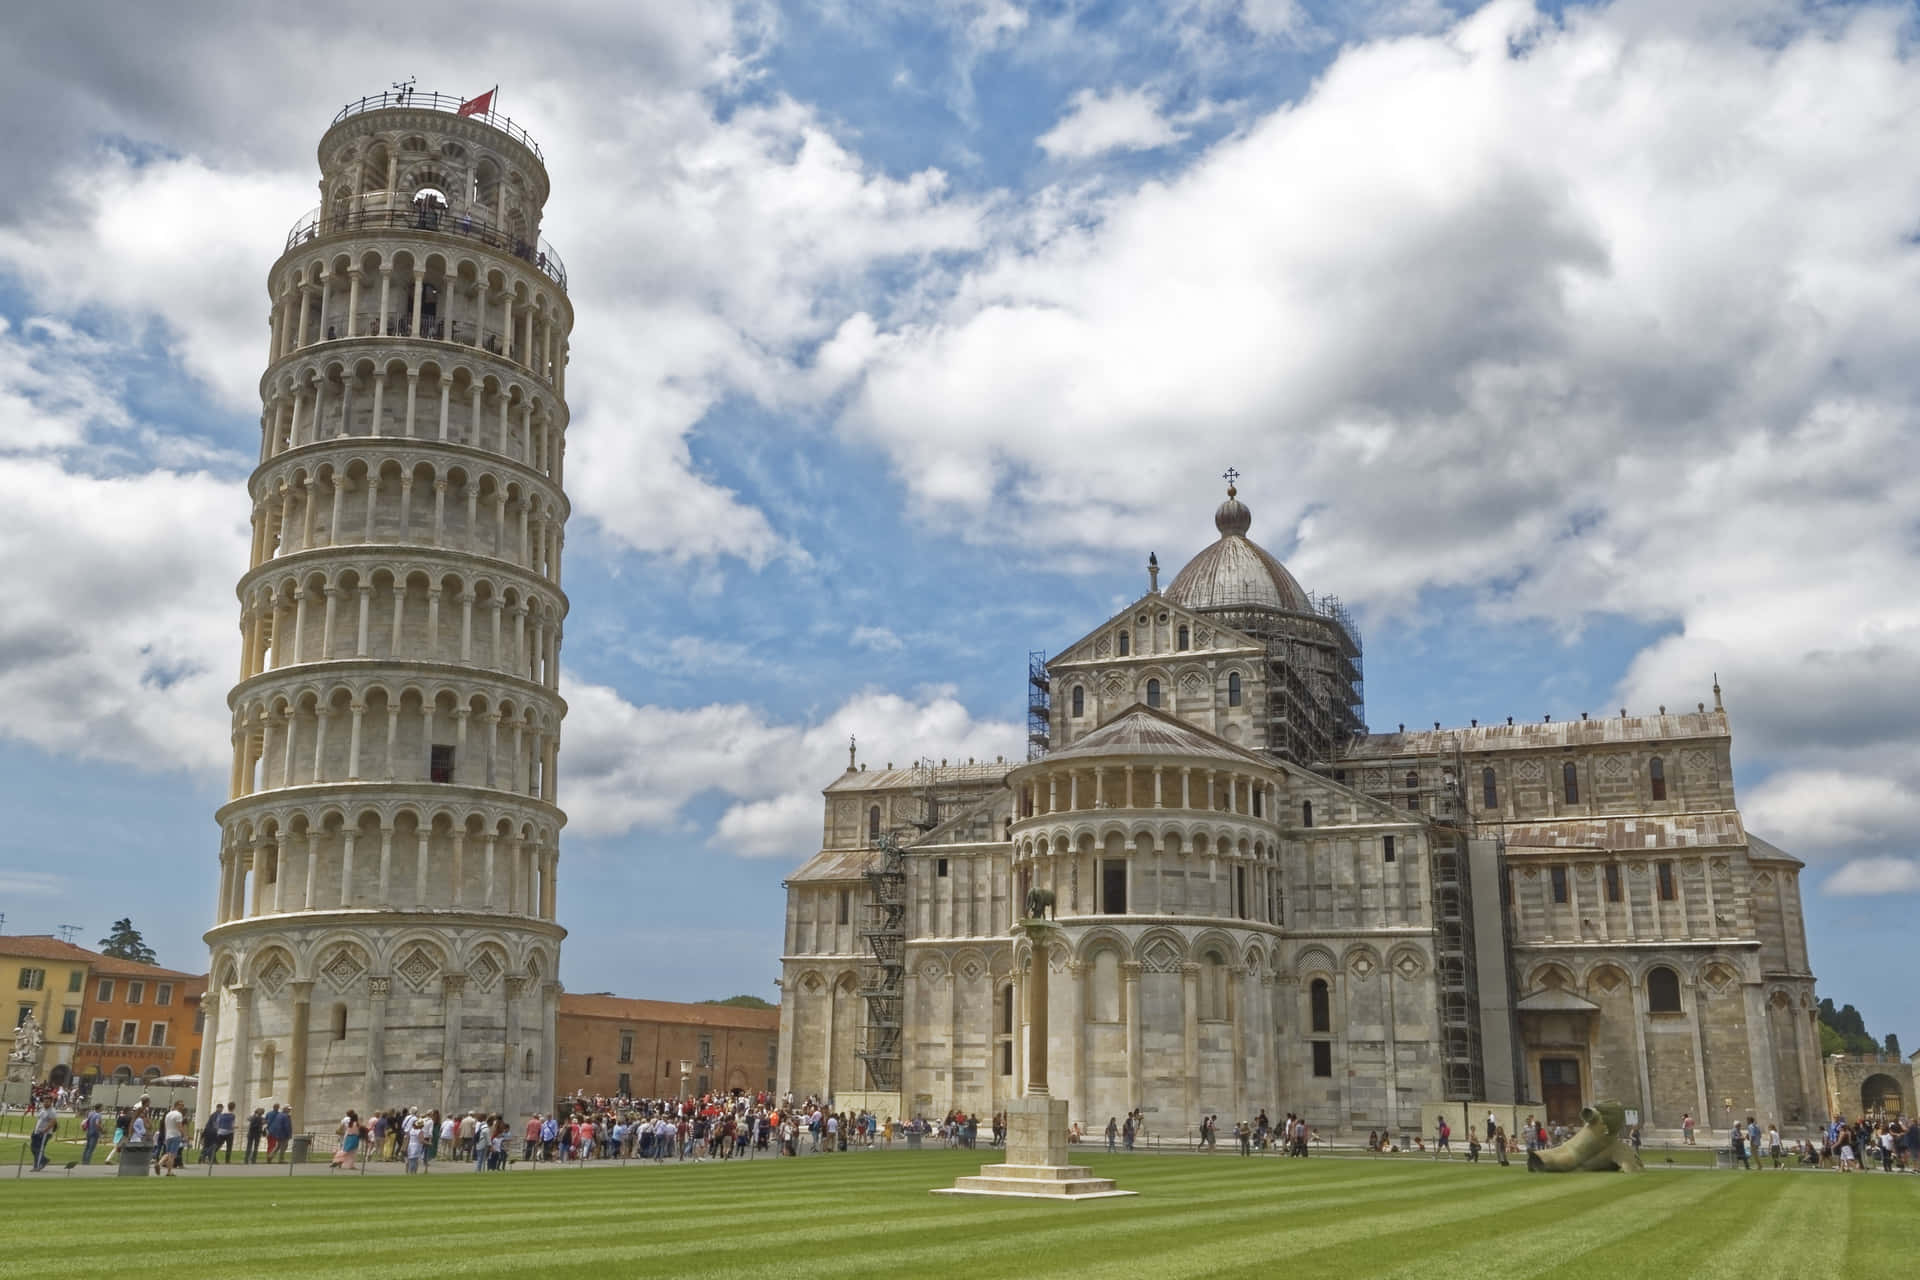 Busy Day At Tower Of Pisa Wallpaper